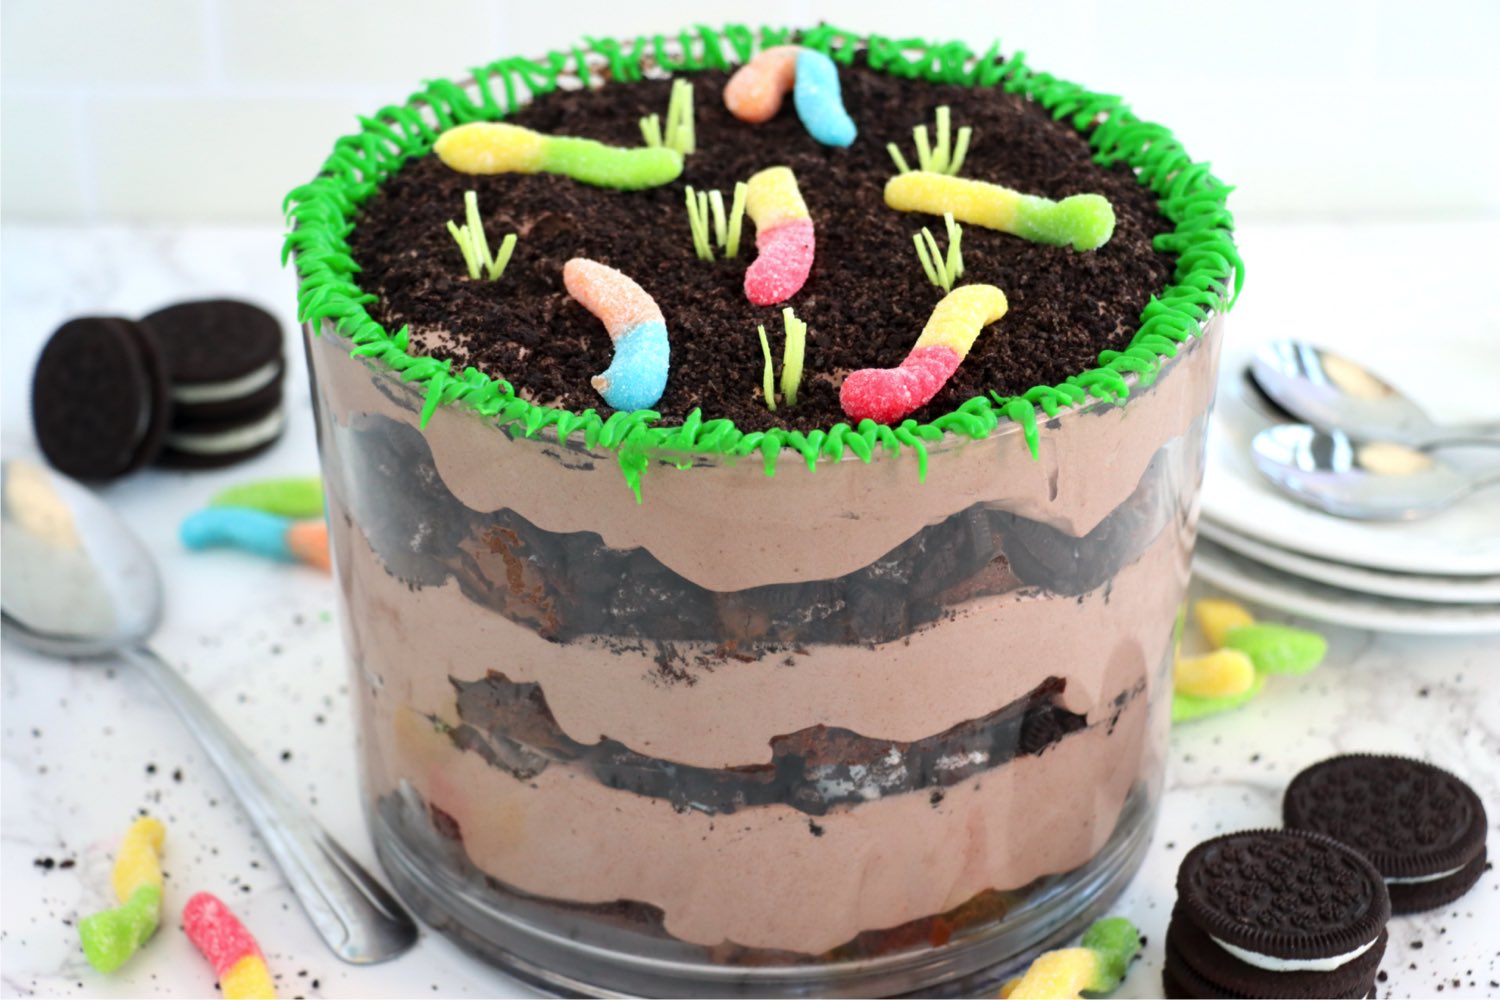 Trifle dessert decorated to look like a dirt cake